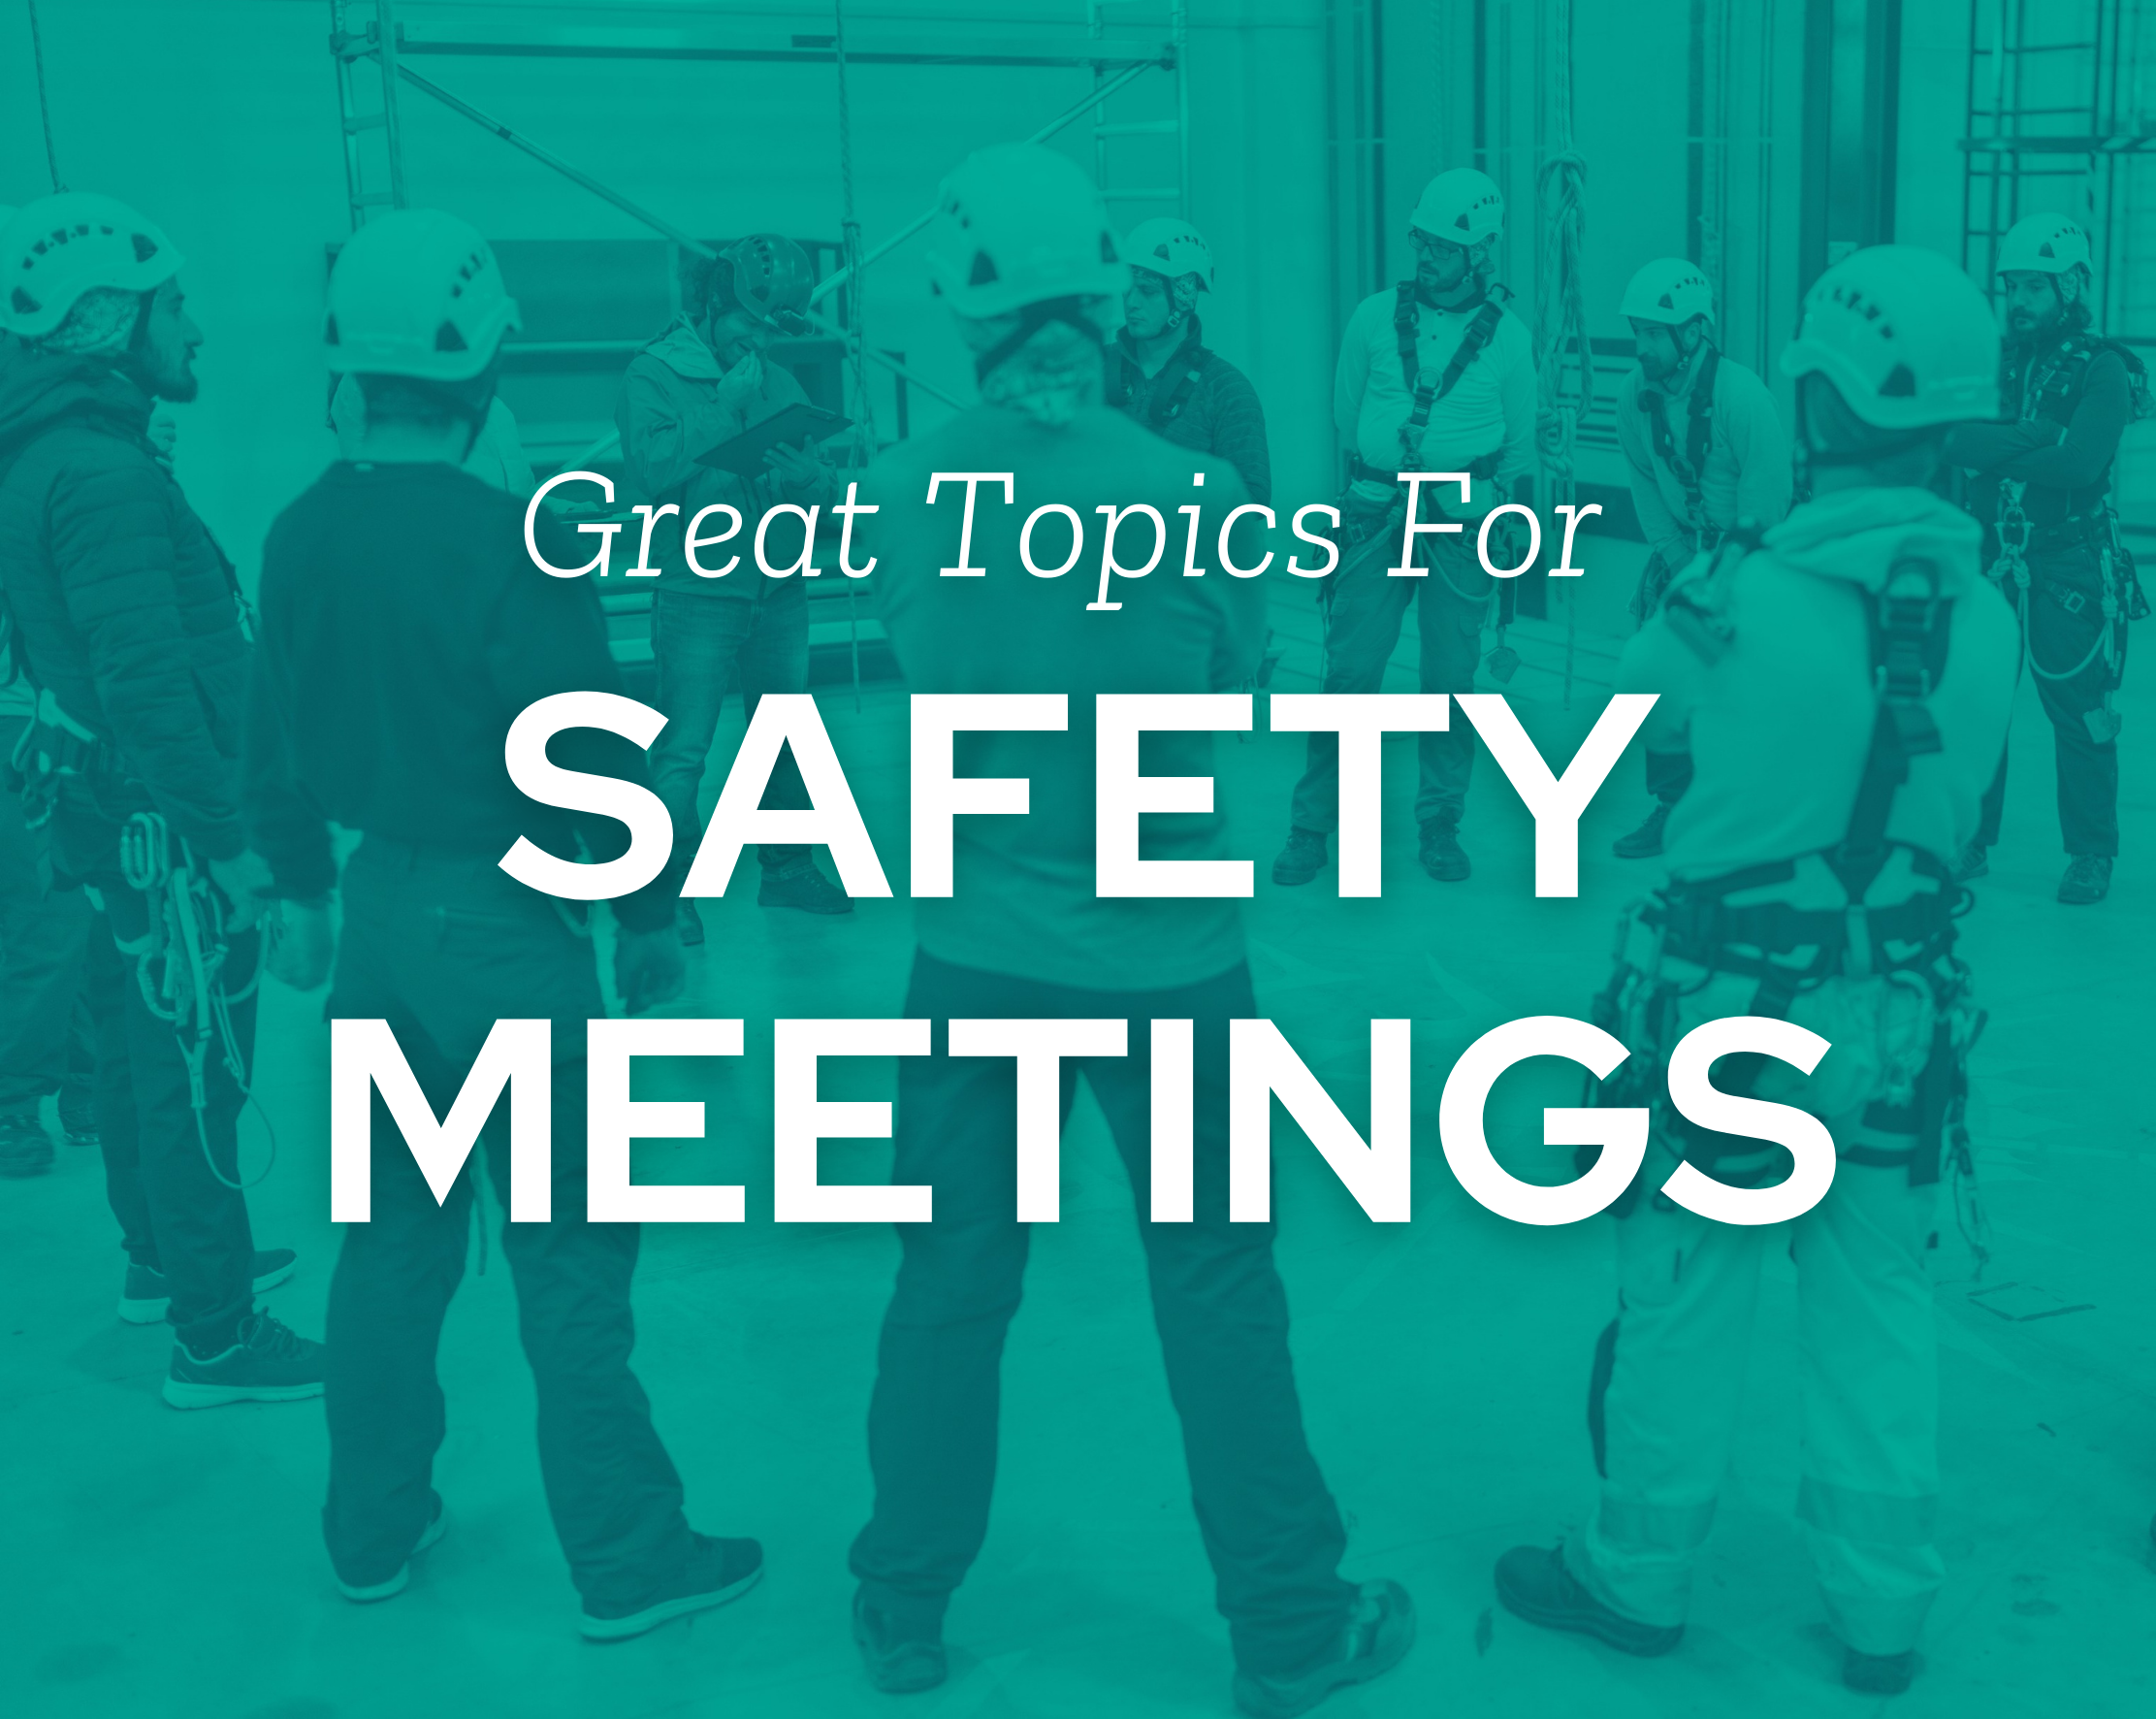 Workplace Safety Tips not to be missed - ASK EHS Blog